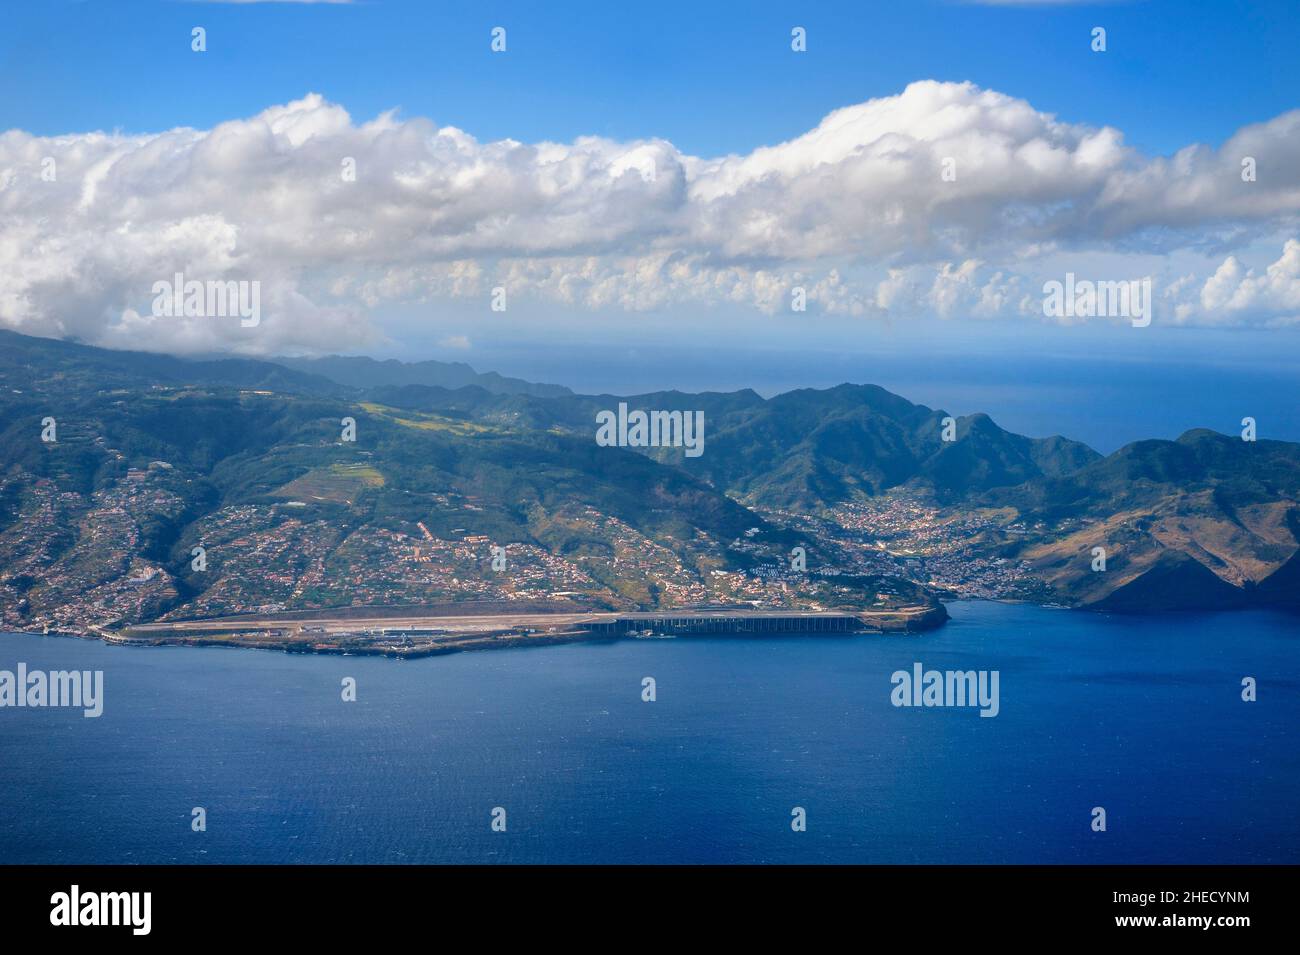 Portugal, Madeira Island, Madeira Cristiano-Ronaldo International Airport which has a 2781m runway extended over the sea thanks to pillars (aerial view) Stock Photo